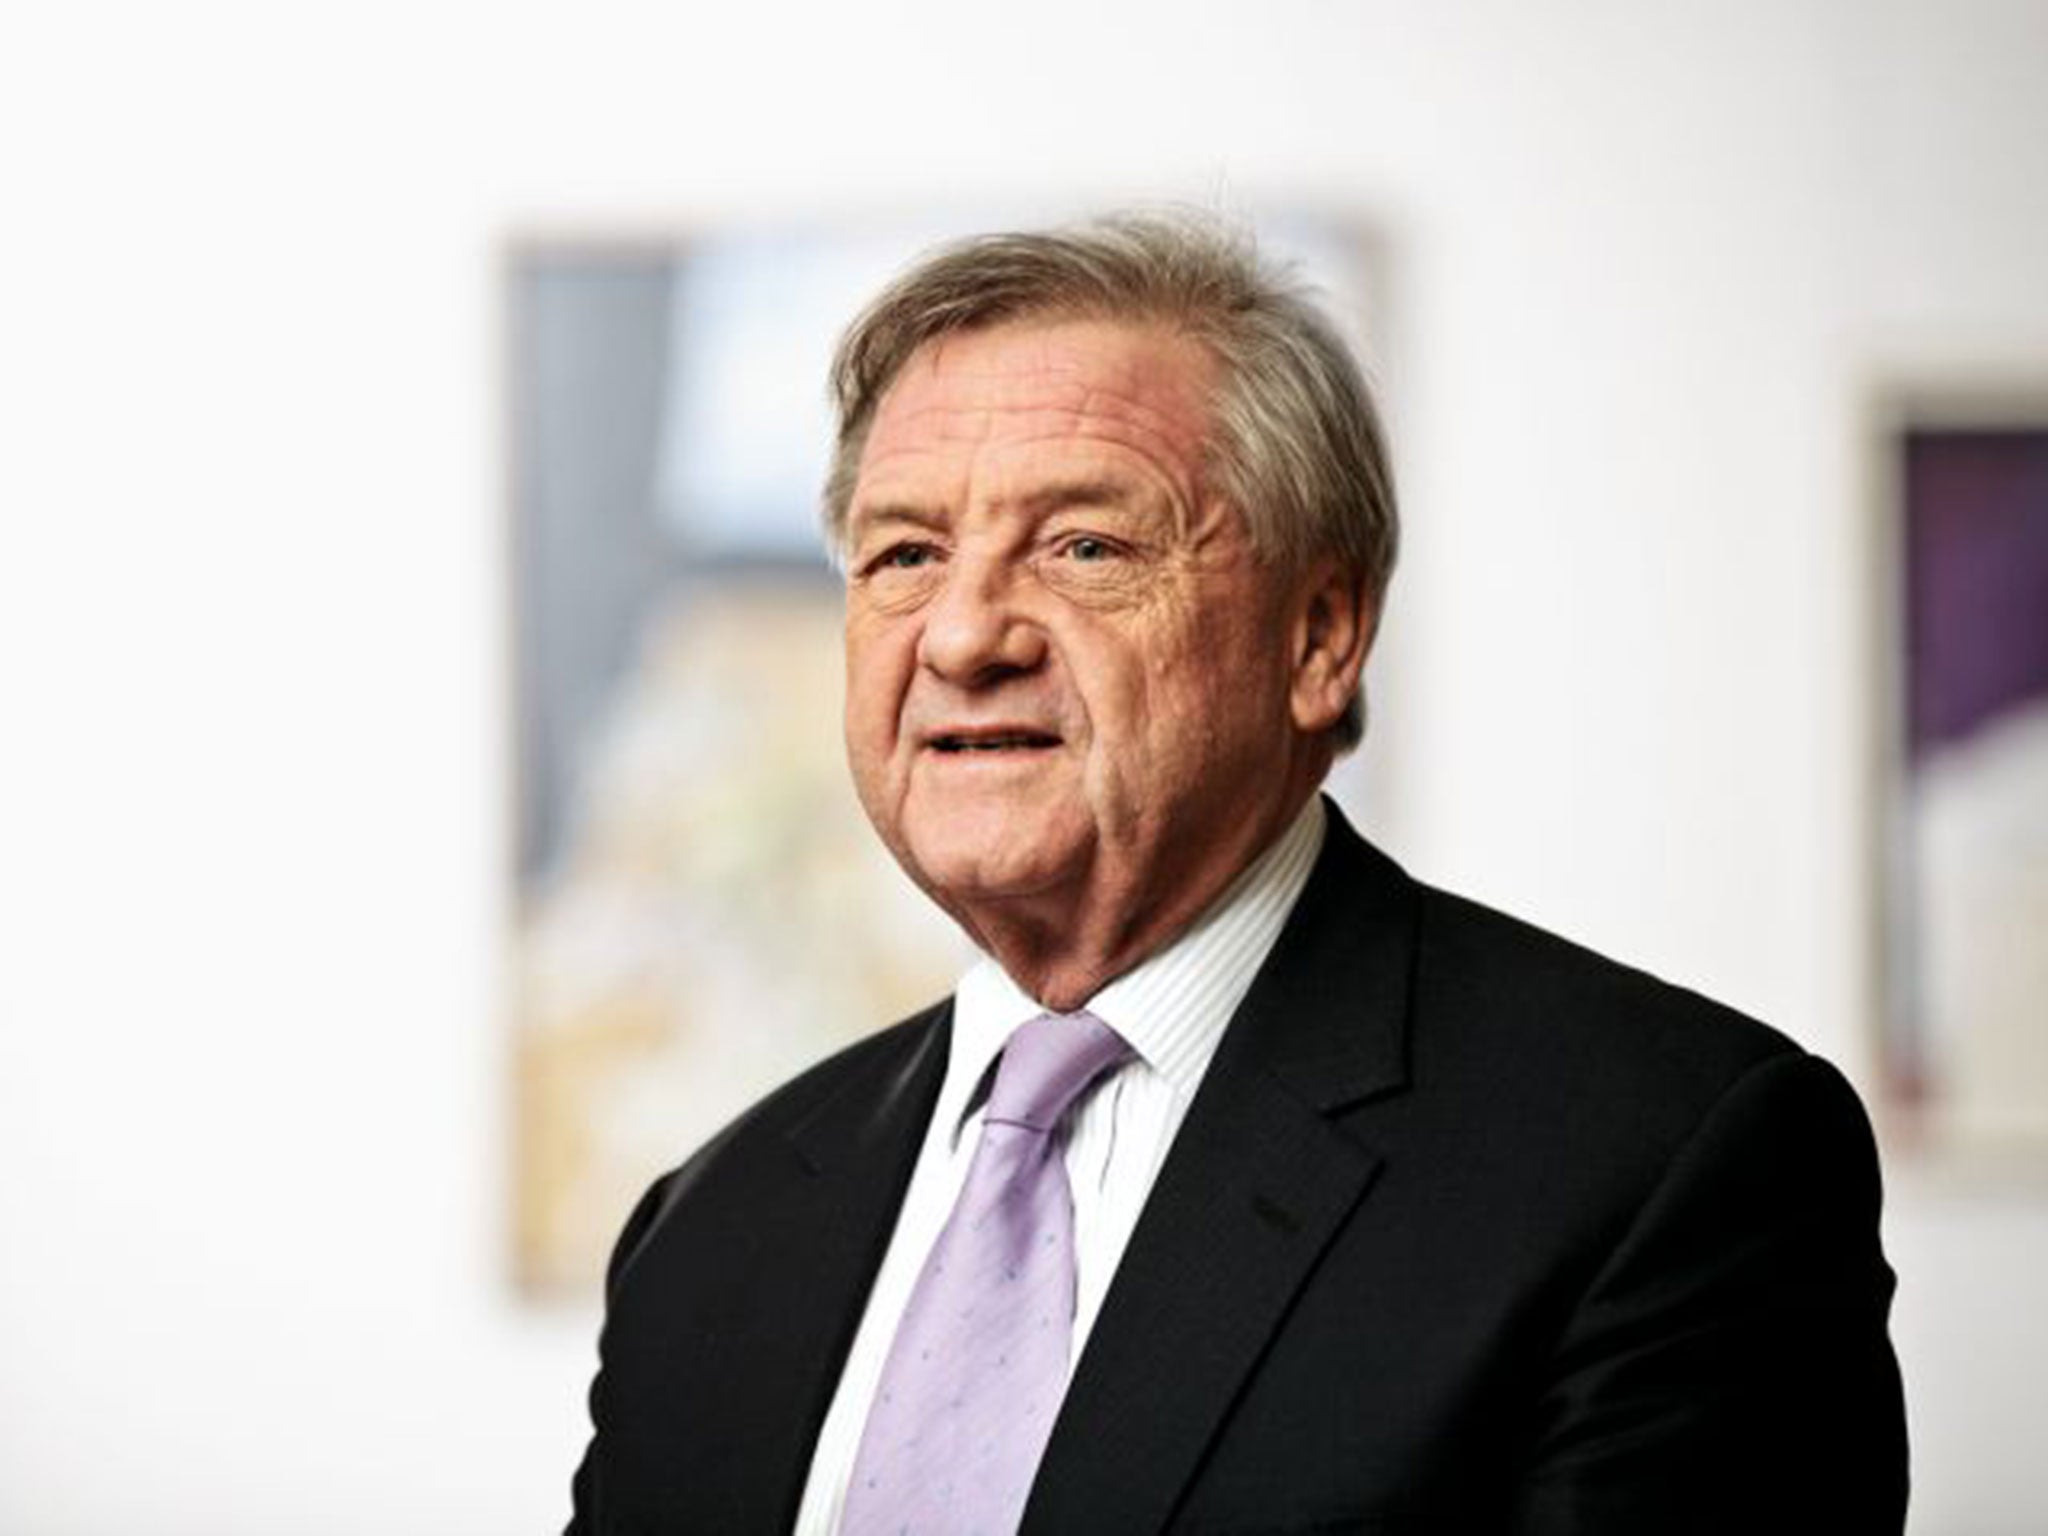 Sir Mike Rake, president of the CBI, will say in a speech that the EU and the City need each other